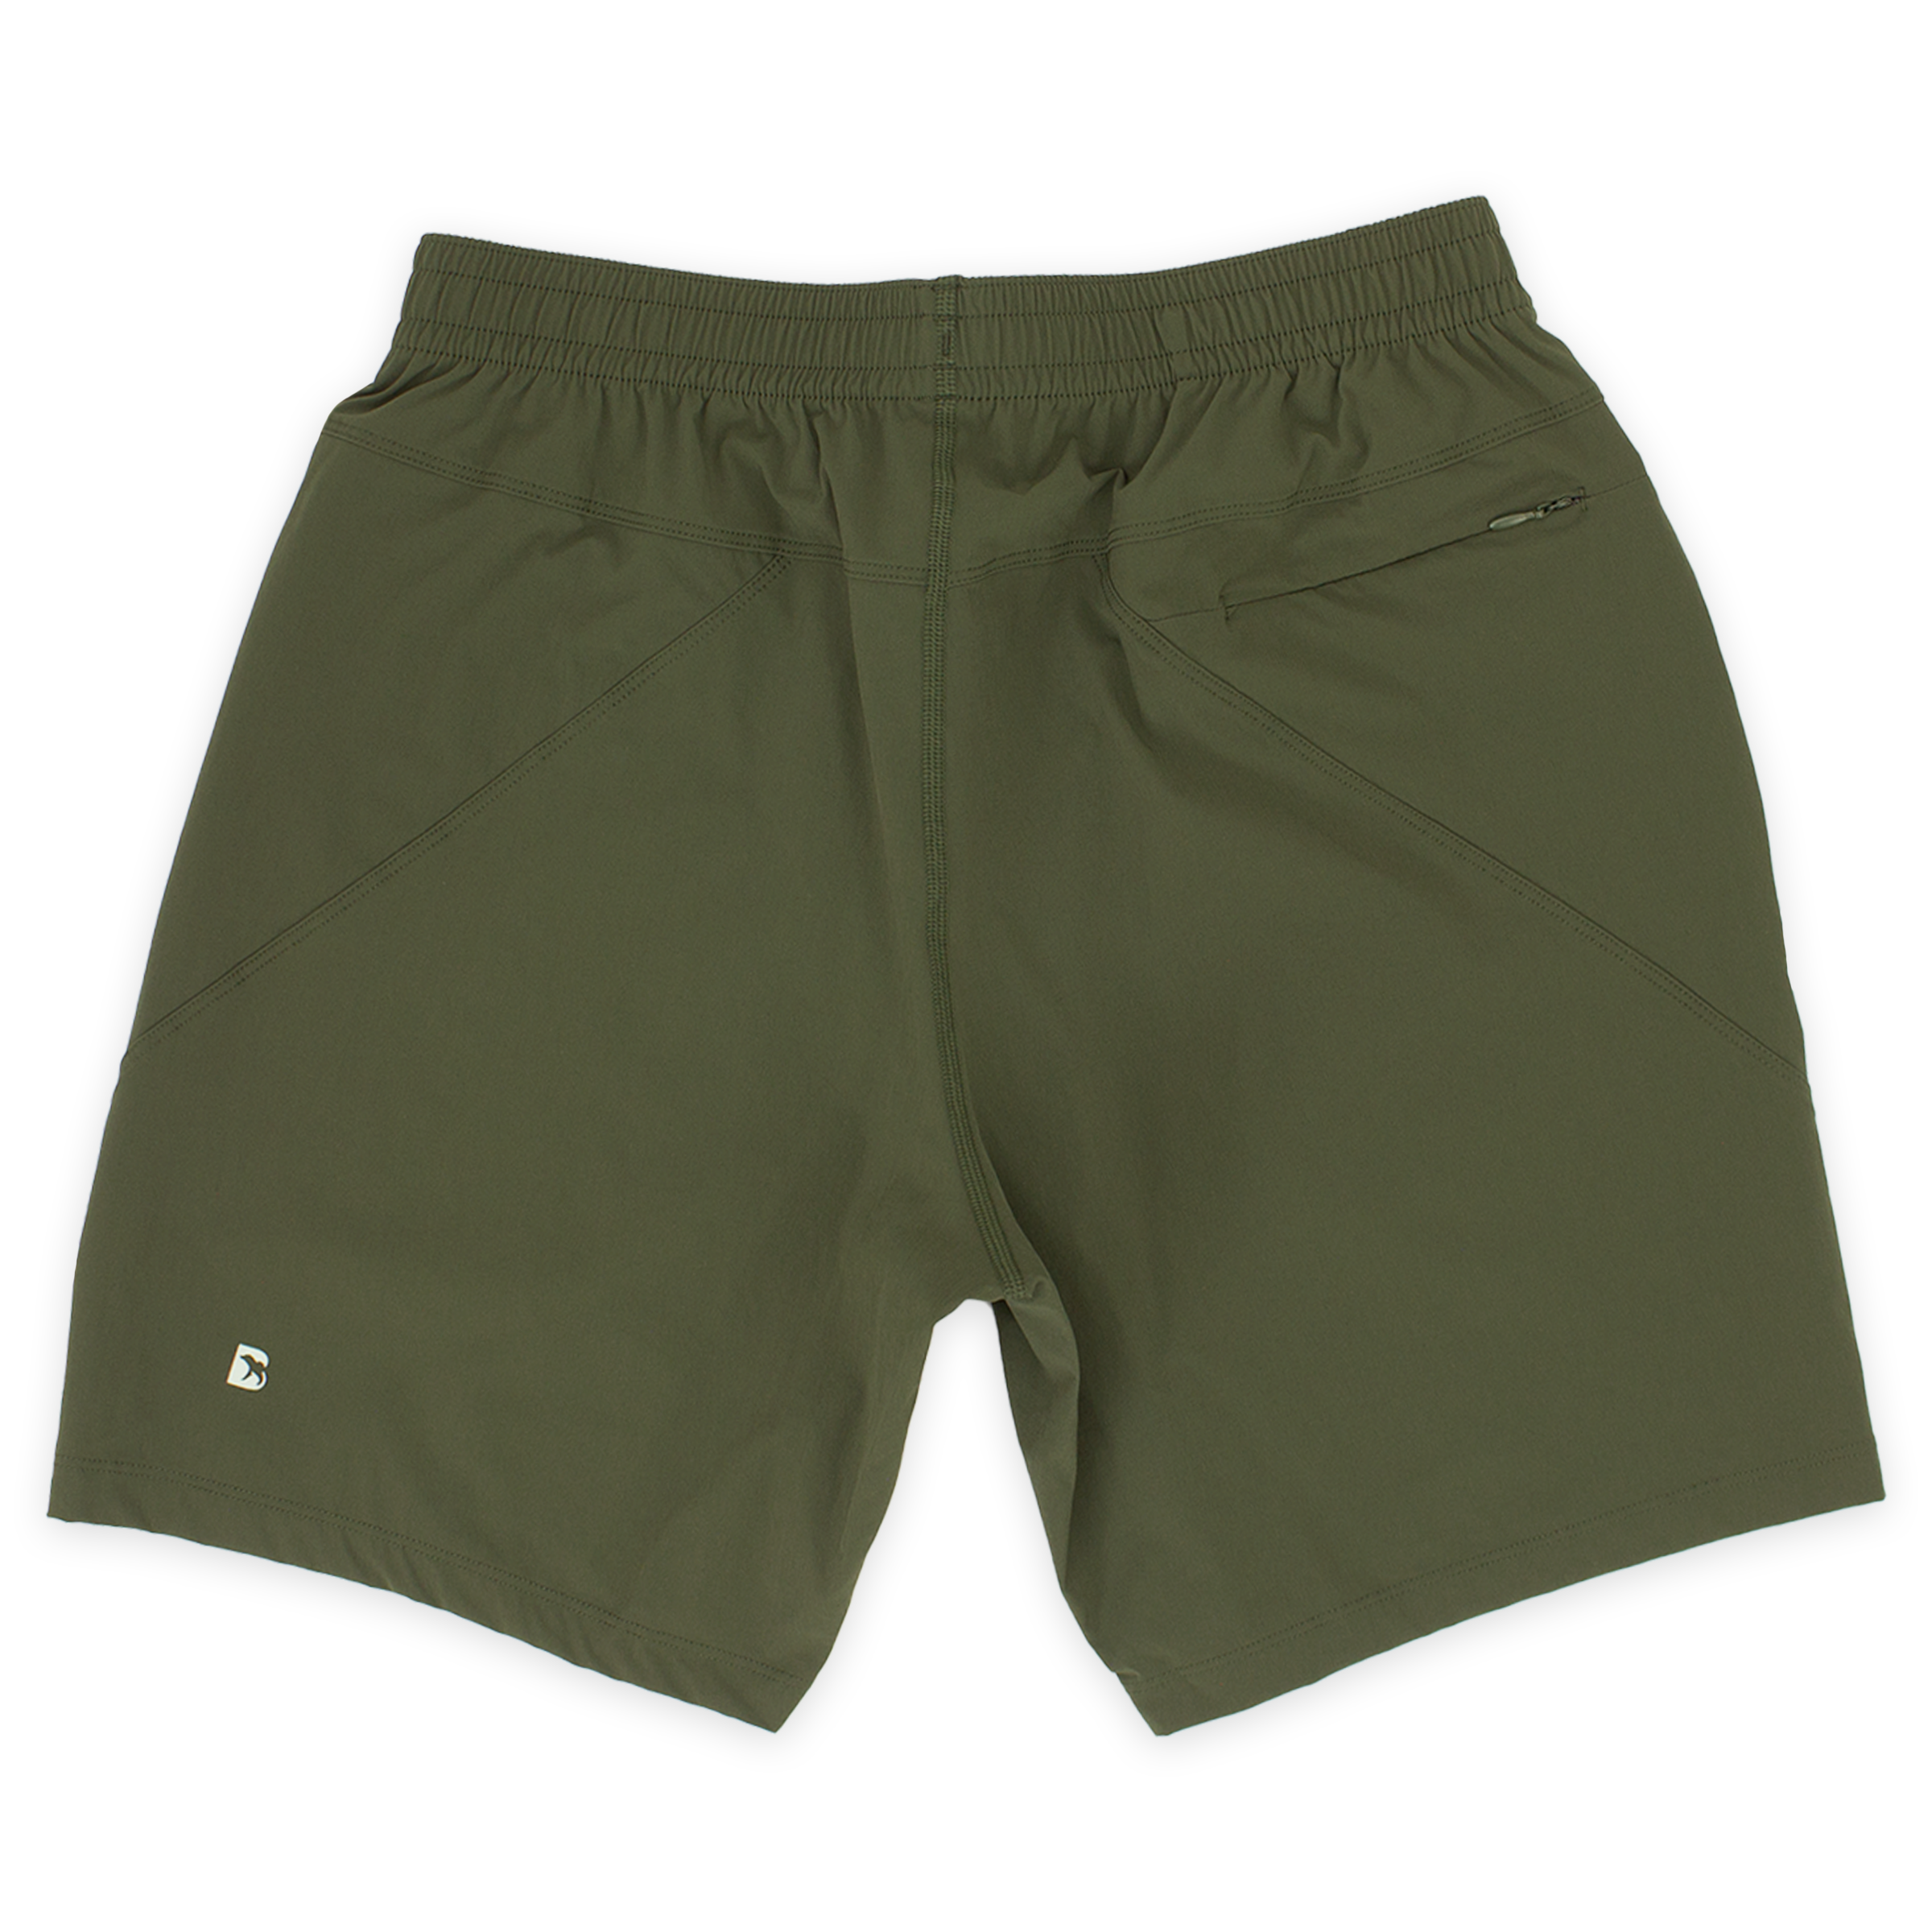 Atlas Short 7" Military Green Back with elastic waistband, back right zippered pocket, and small reflective logo of Bear drawn inside the letter B in bottom left corner